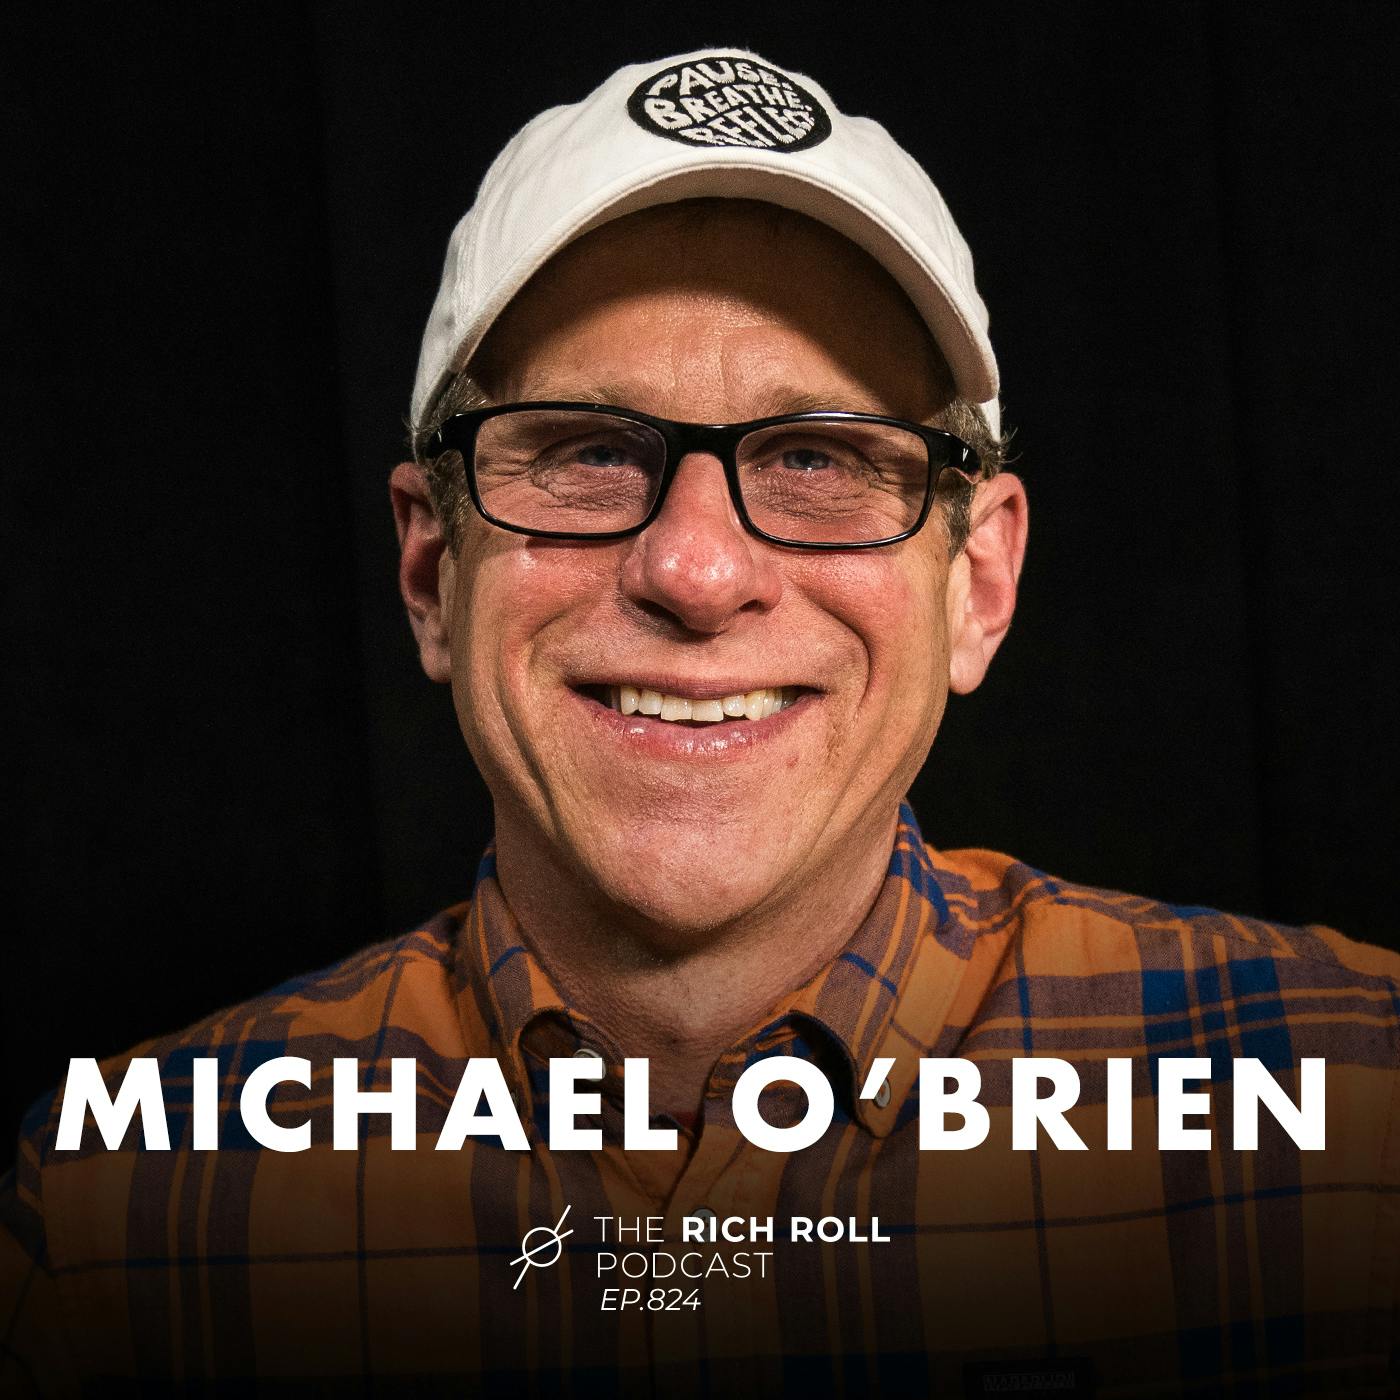 Pause, Breathe, Reflect: How A Brush With Death Changed Michael O’Brien’s Life